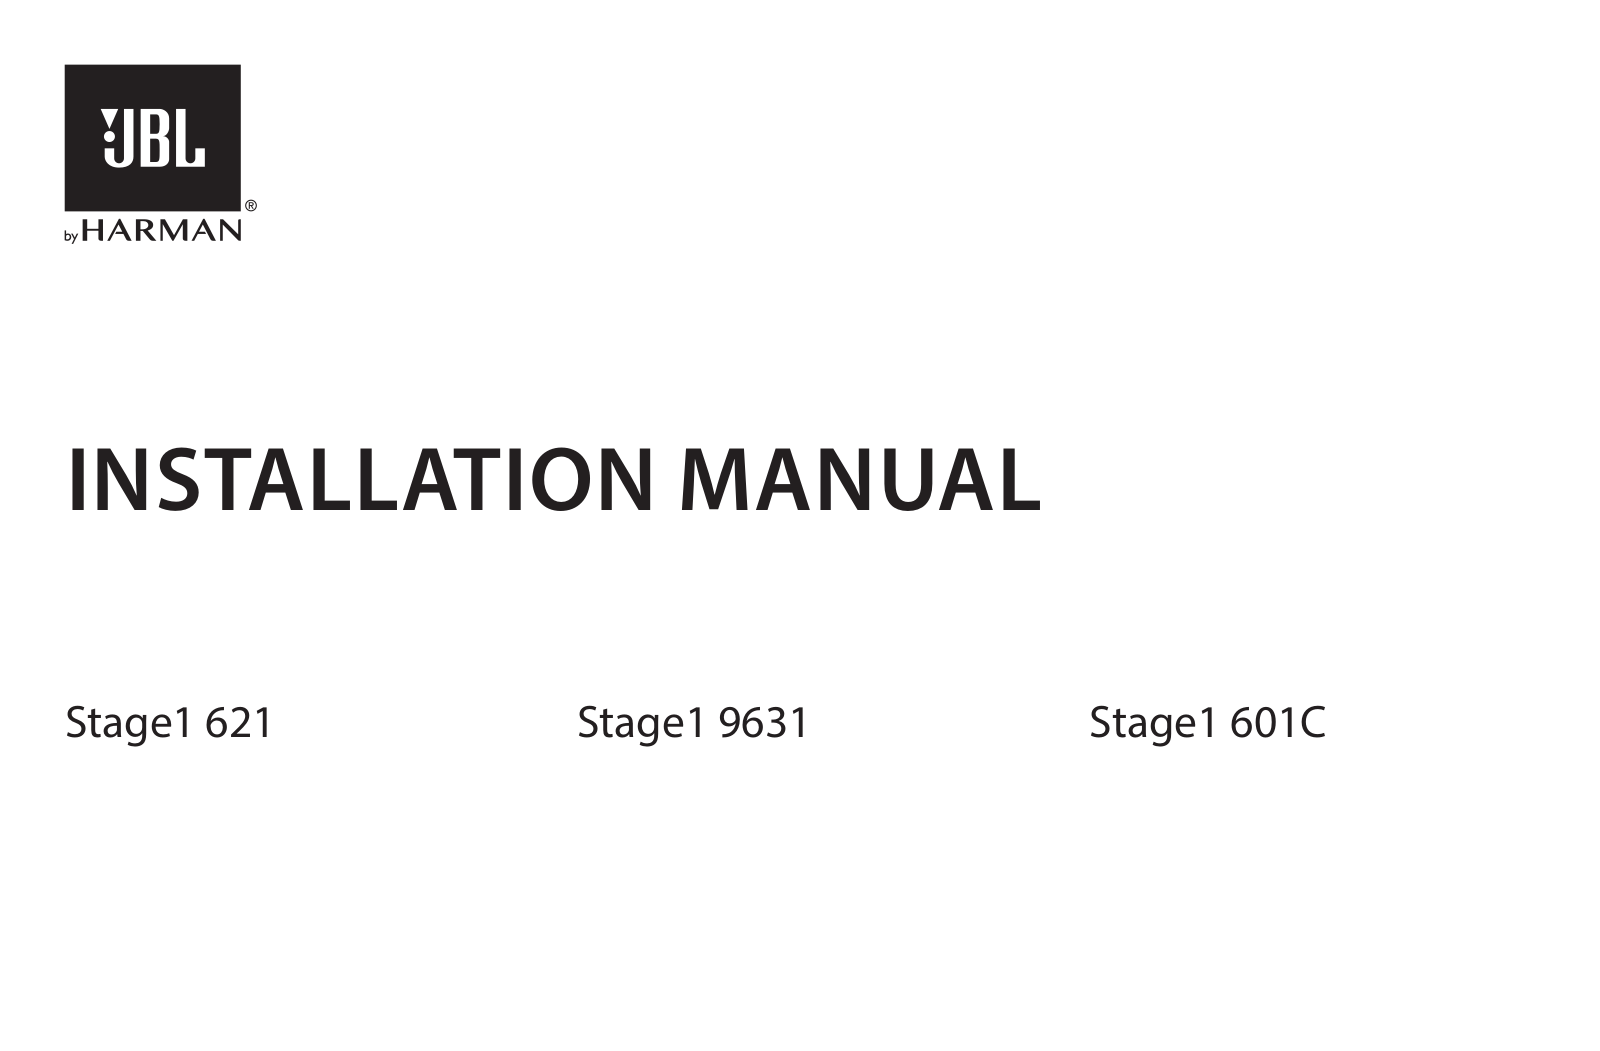 JBL Stage1 621, Stage1 9631, Stage1 601C INSTALLATION MANUAL